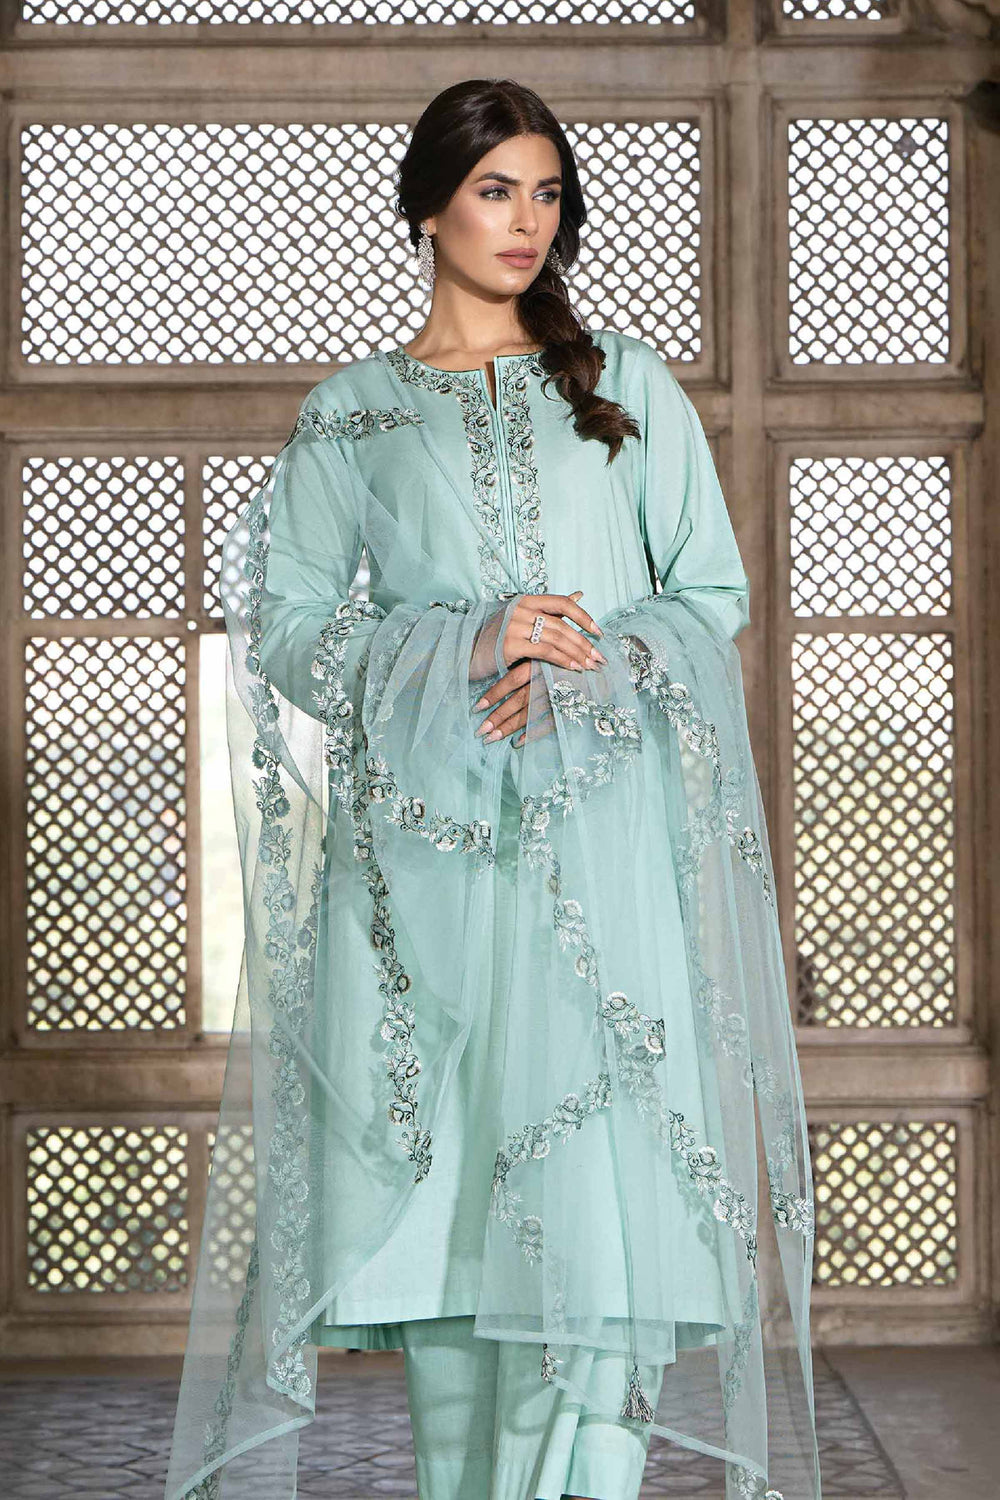 Embroidered Turqoise 3 Piece Suit - Nishat